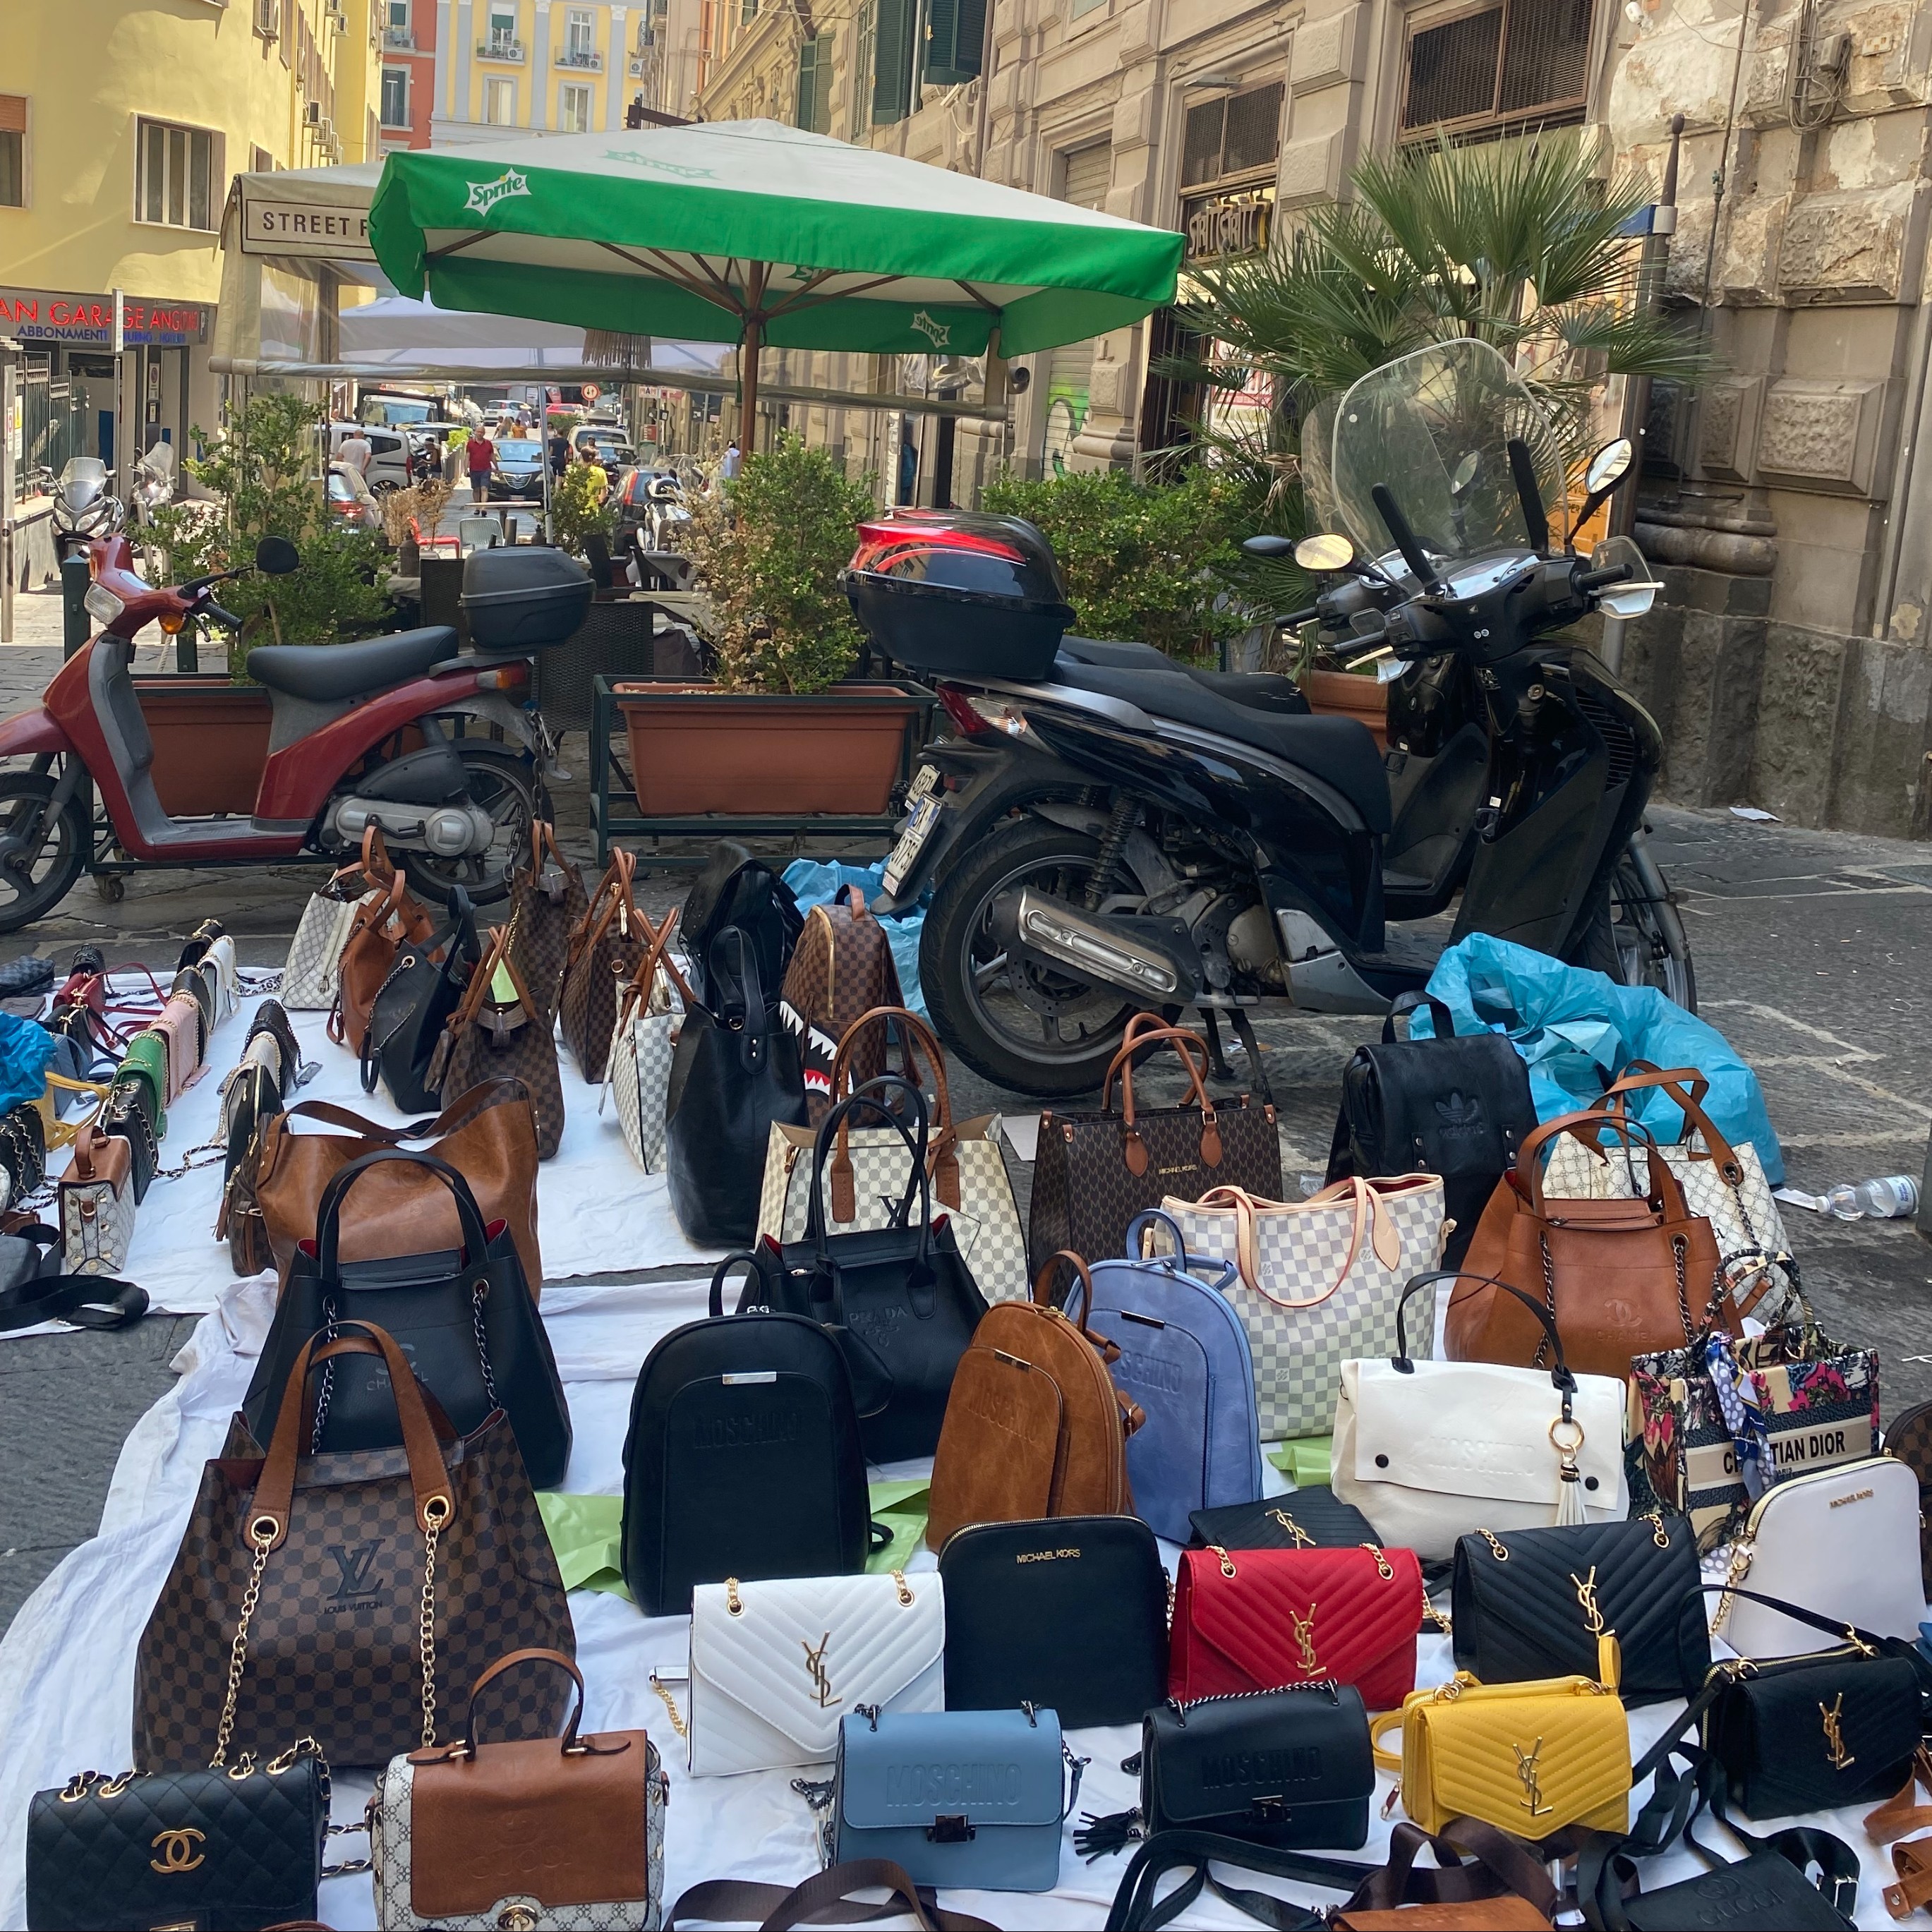 Entrupy on X: Our team came across #counterfeit luxury being sold in plain  sight on the streets of Naples, Italy last week. Even the home of Bottega  Veneta, Gucci, and Prada are